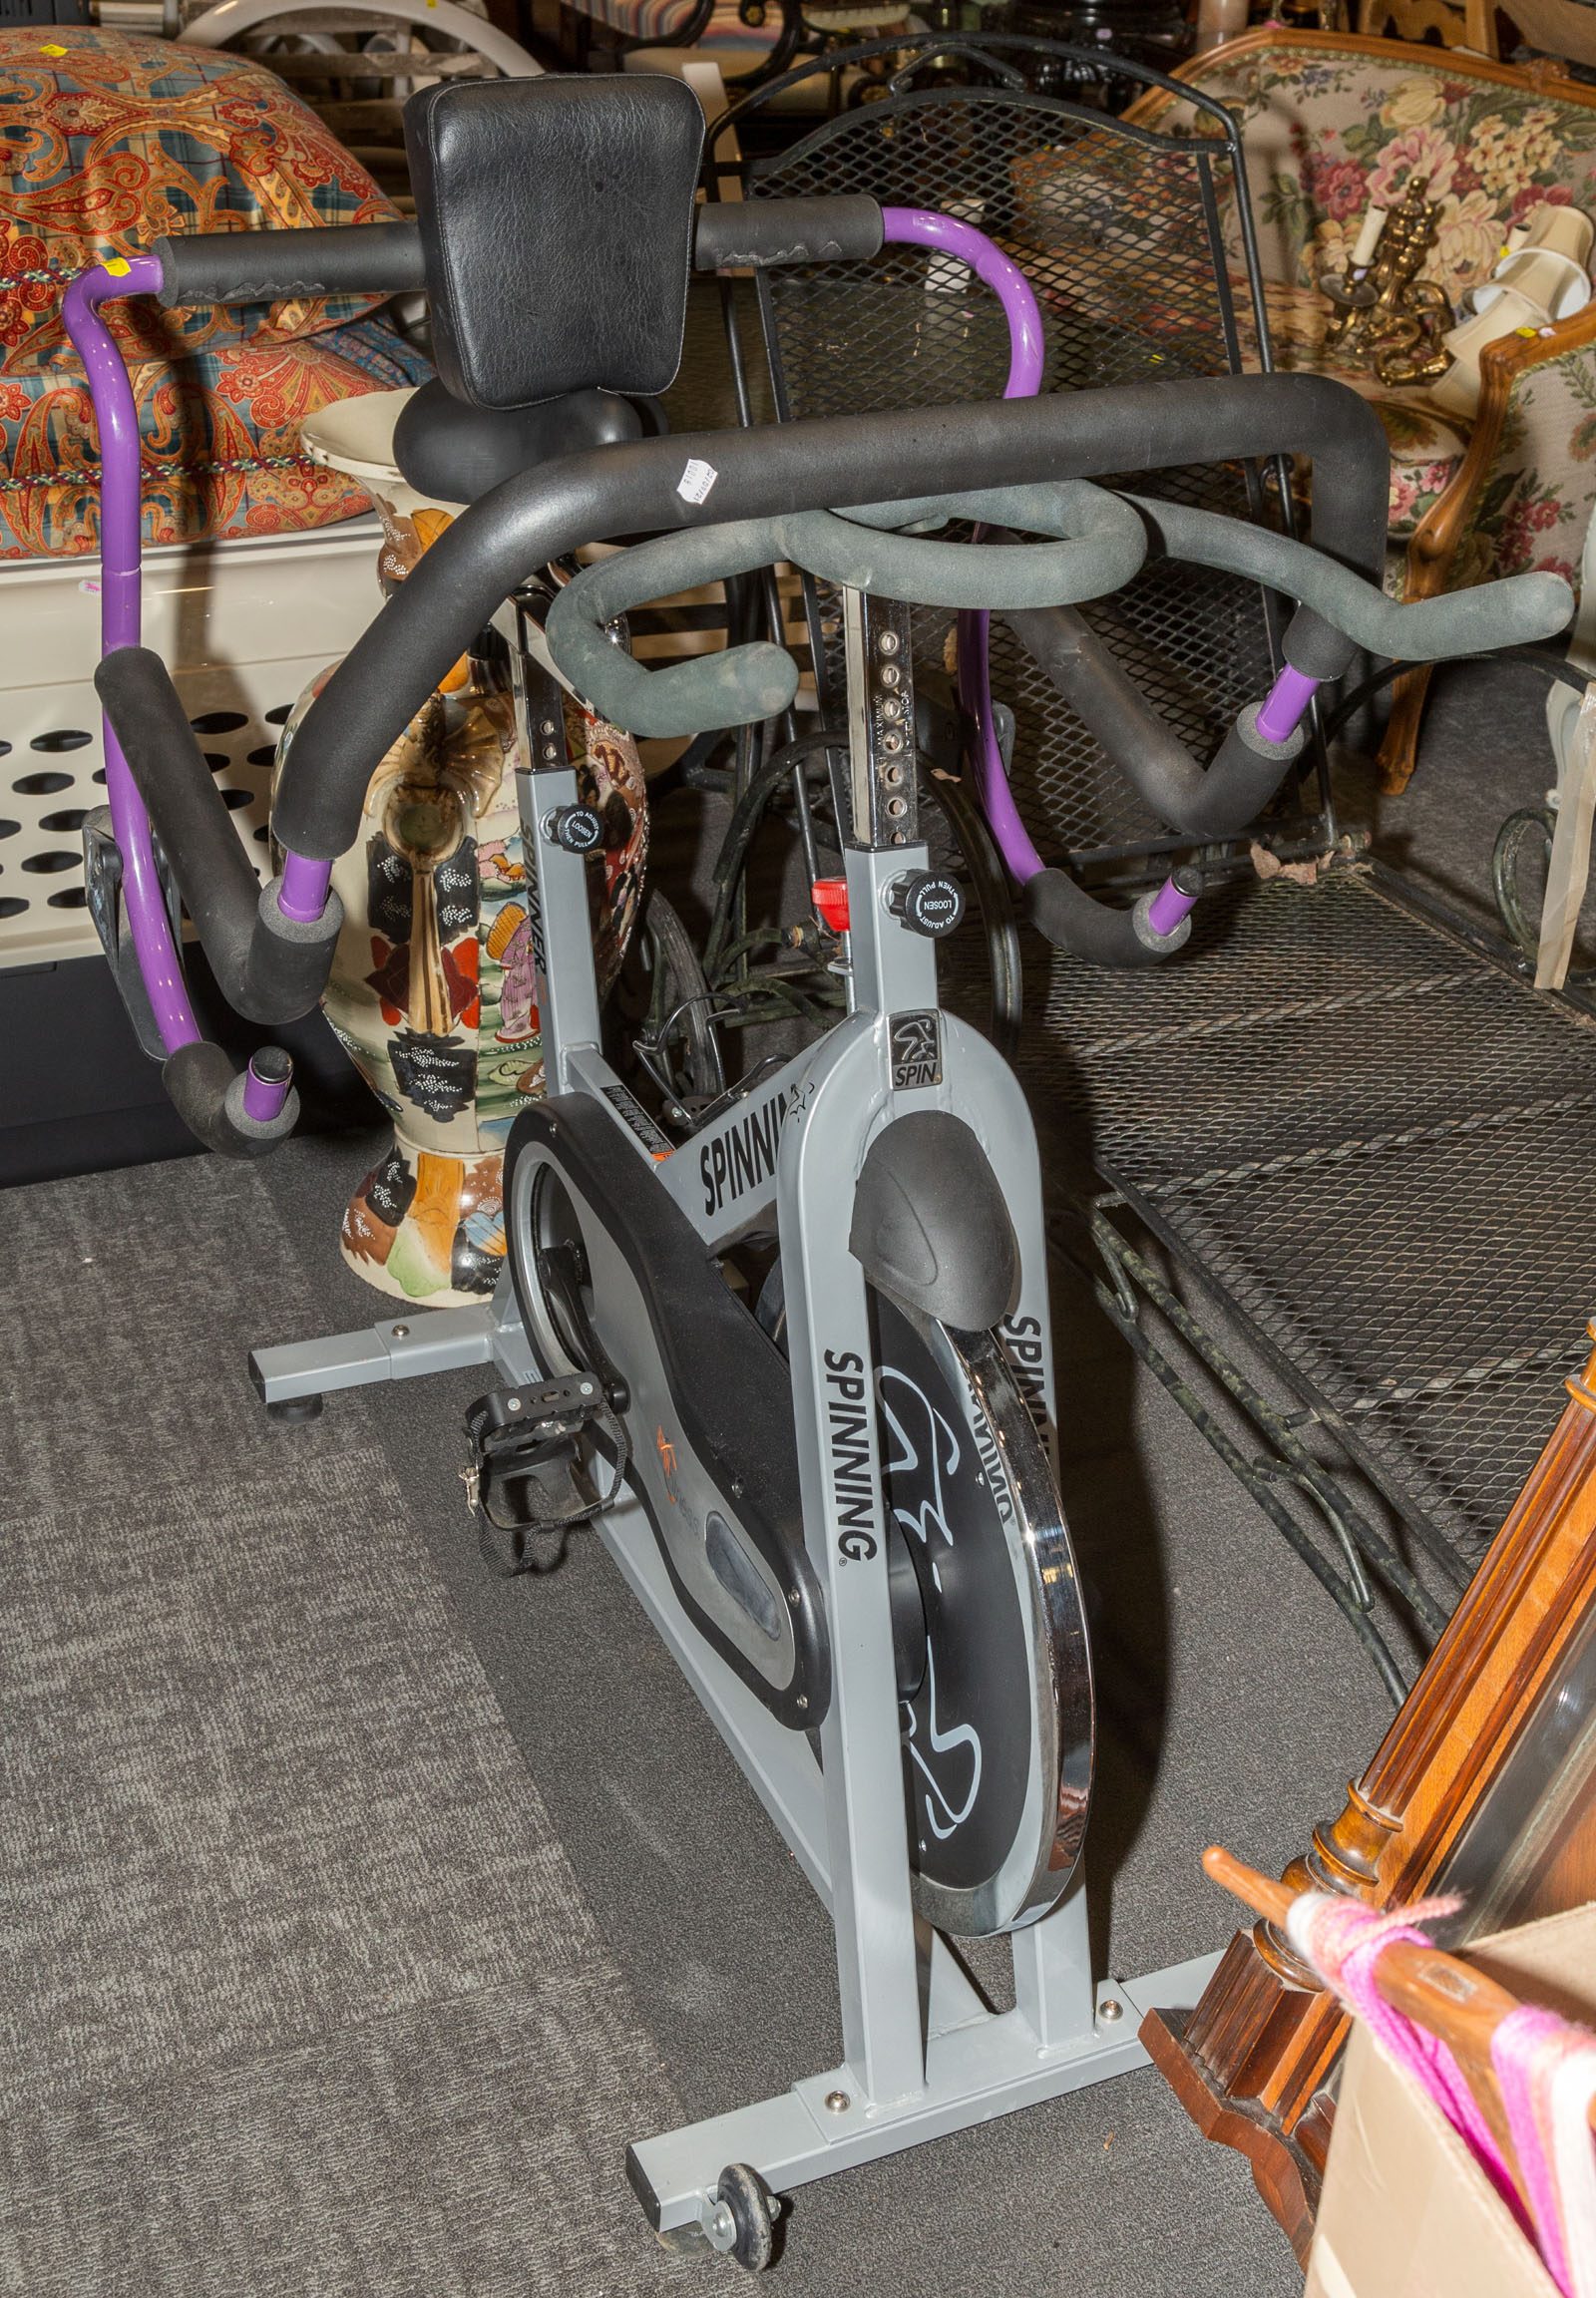 TWO PIECES OF EXERCISE EQUIPMENT